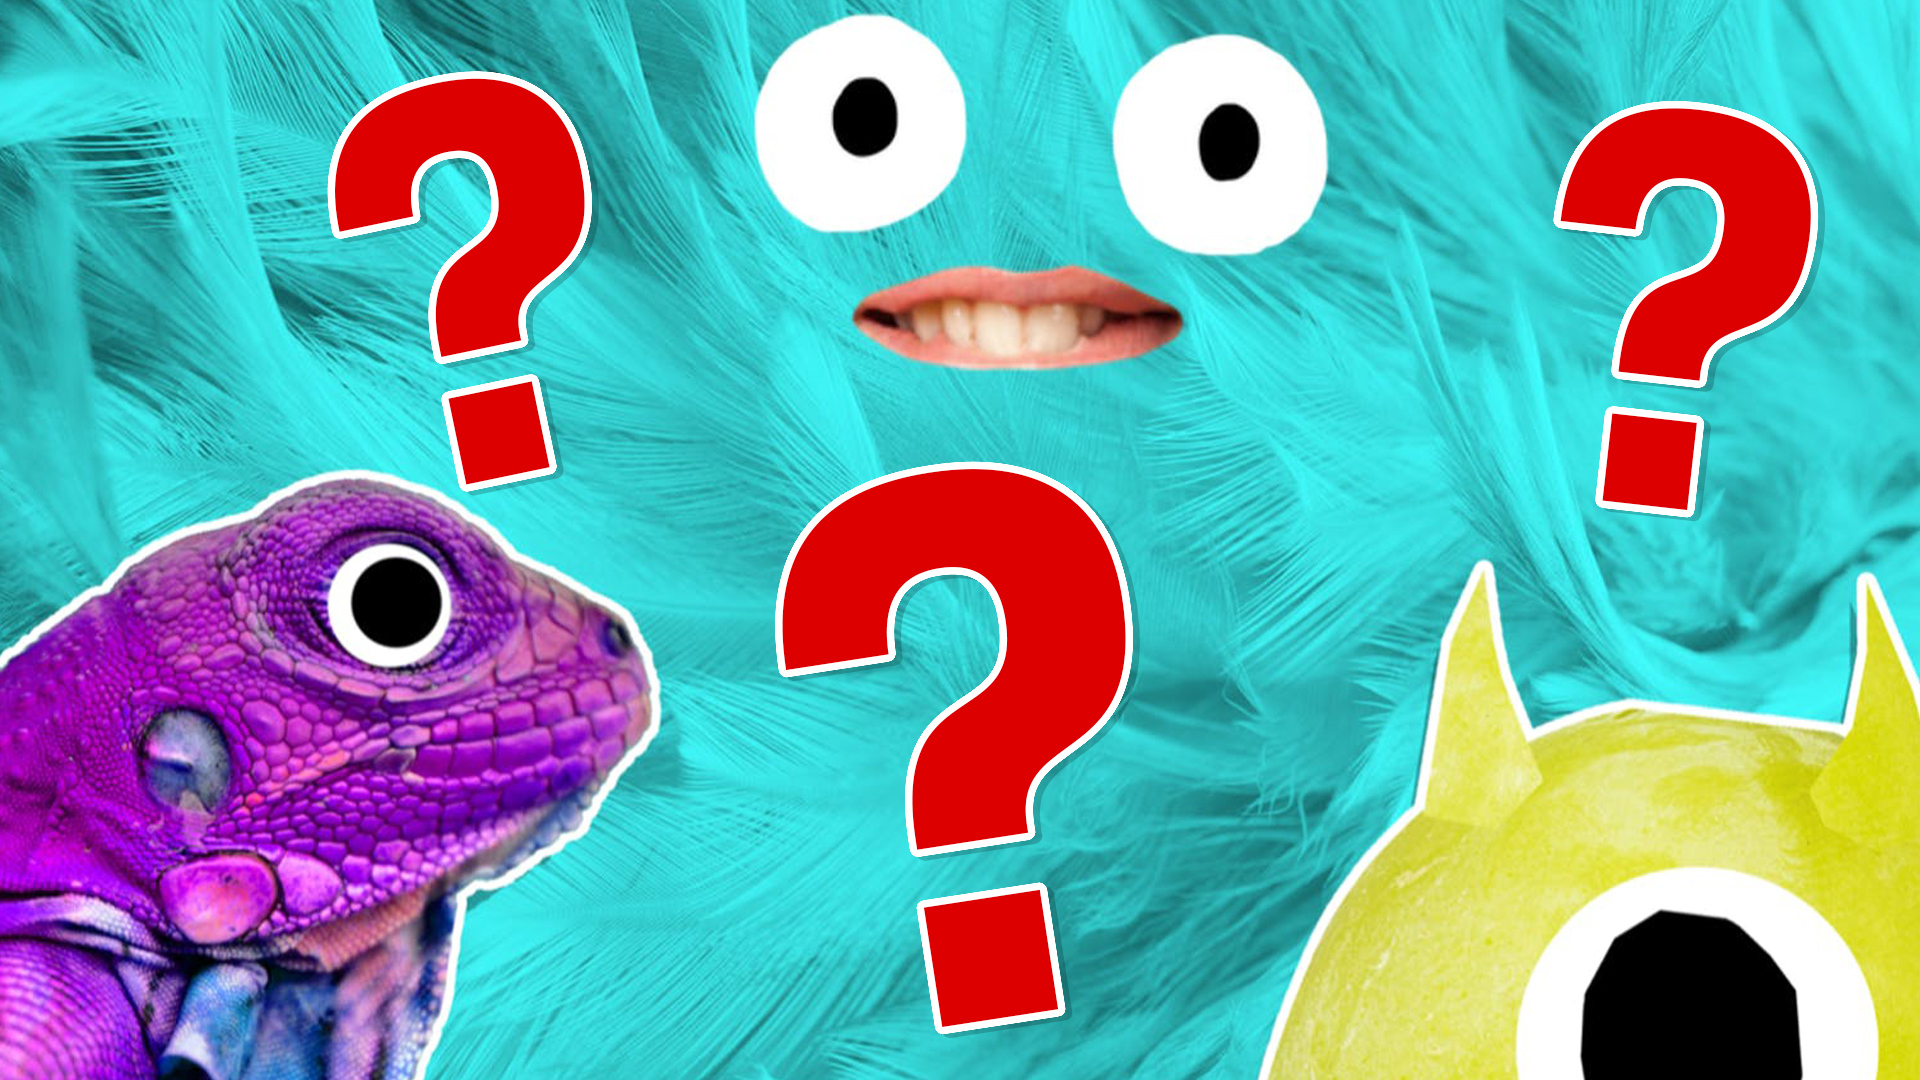 The Ultimate Monsters Inc Quiz